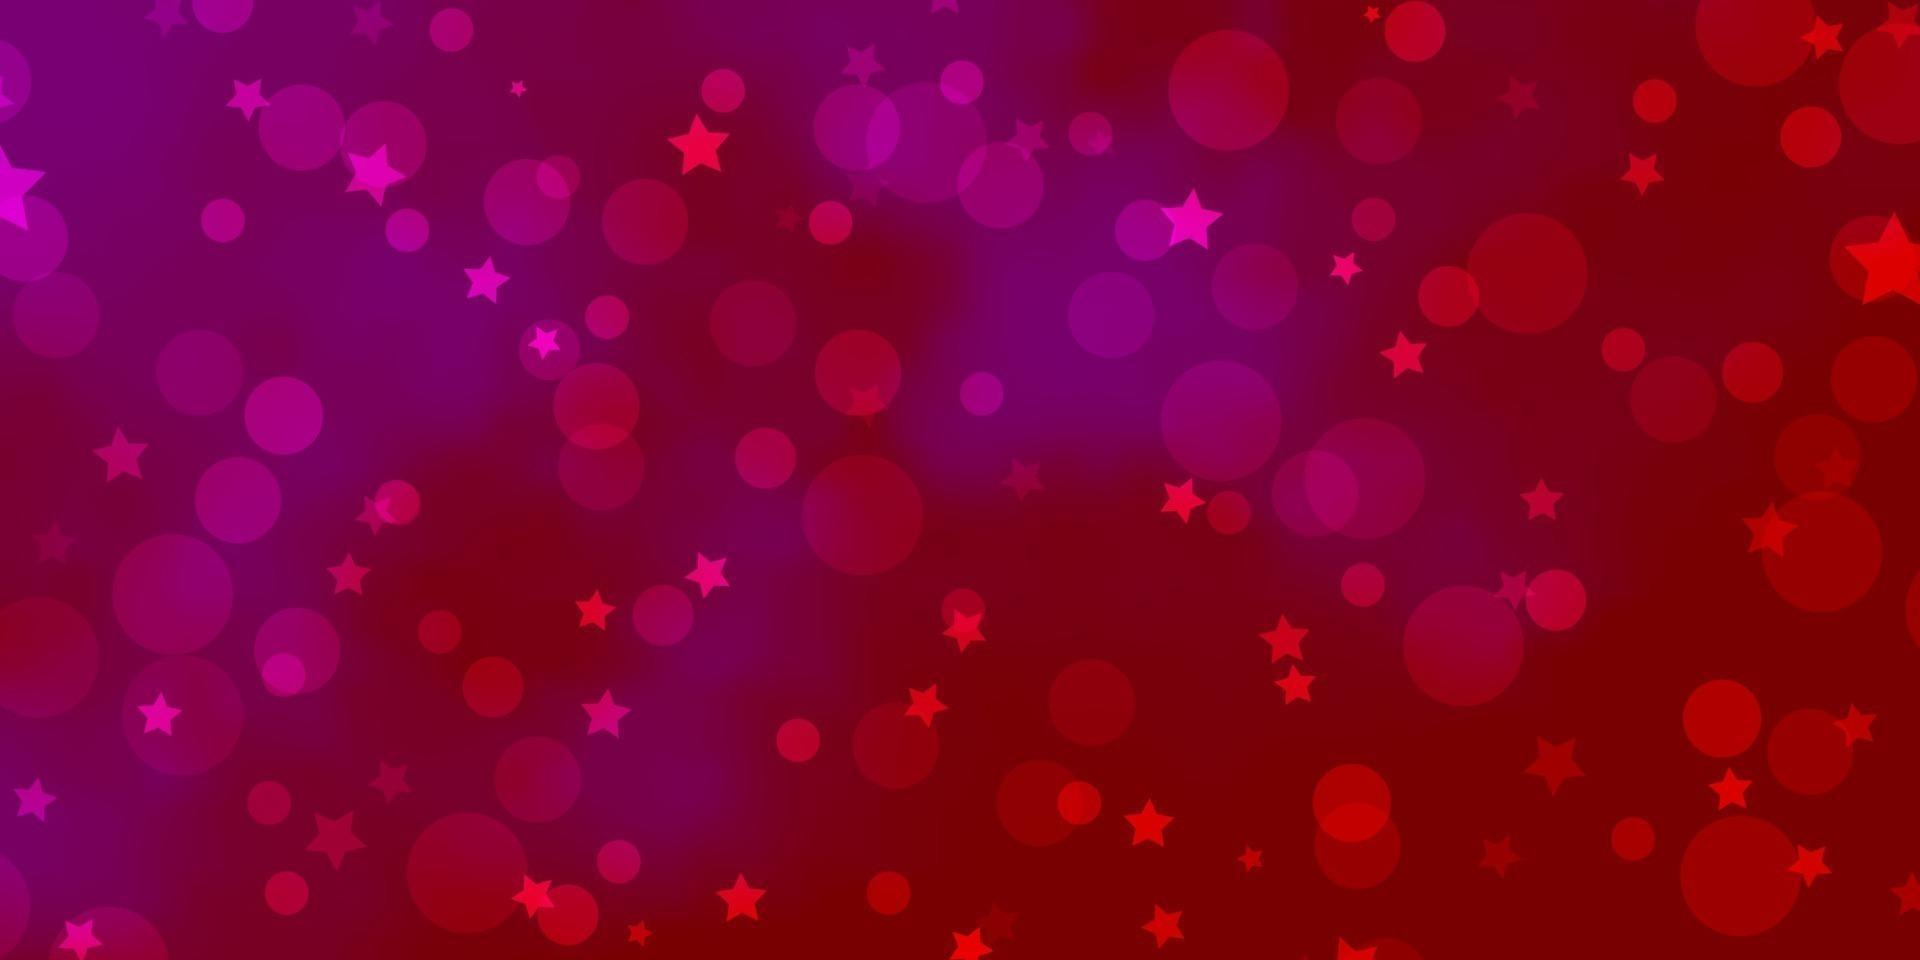 Light Pink vector layout with circles, stars.